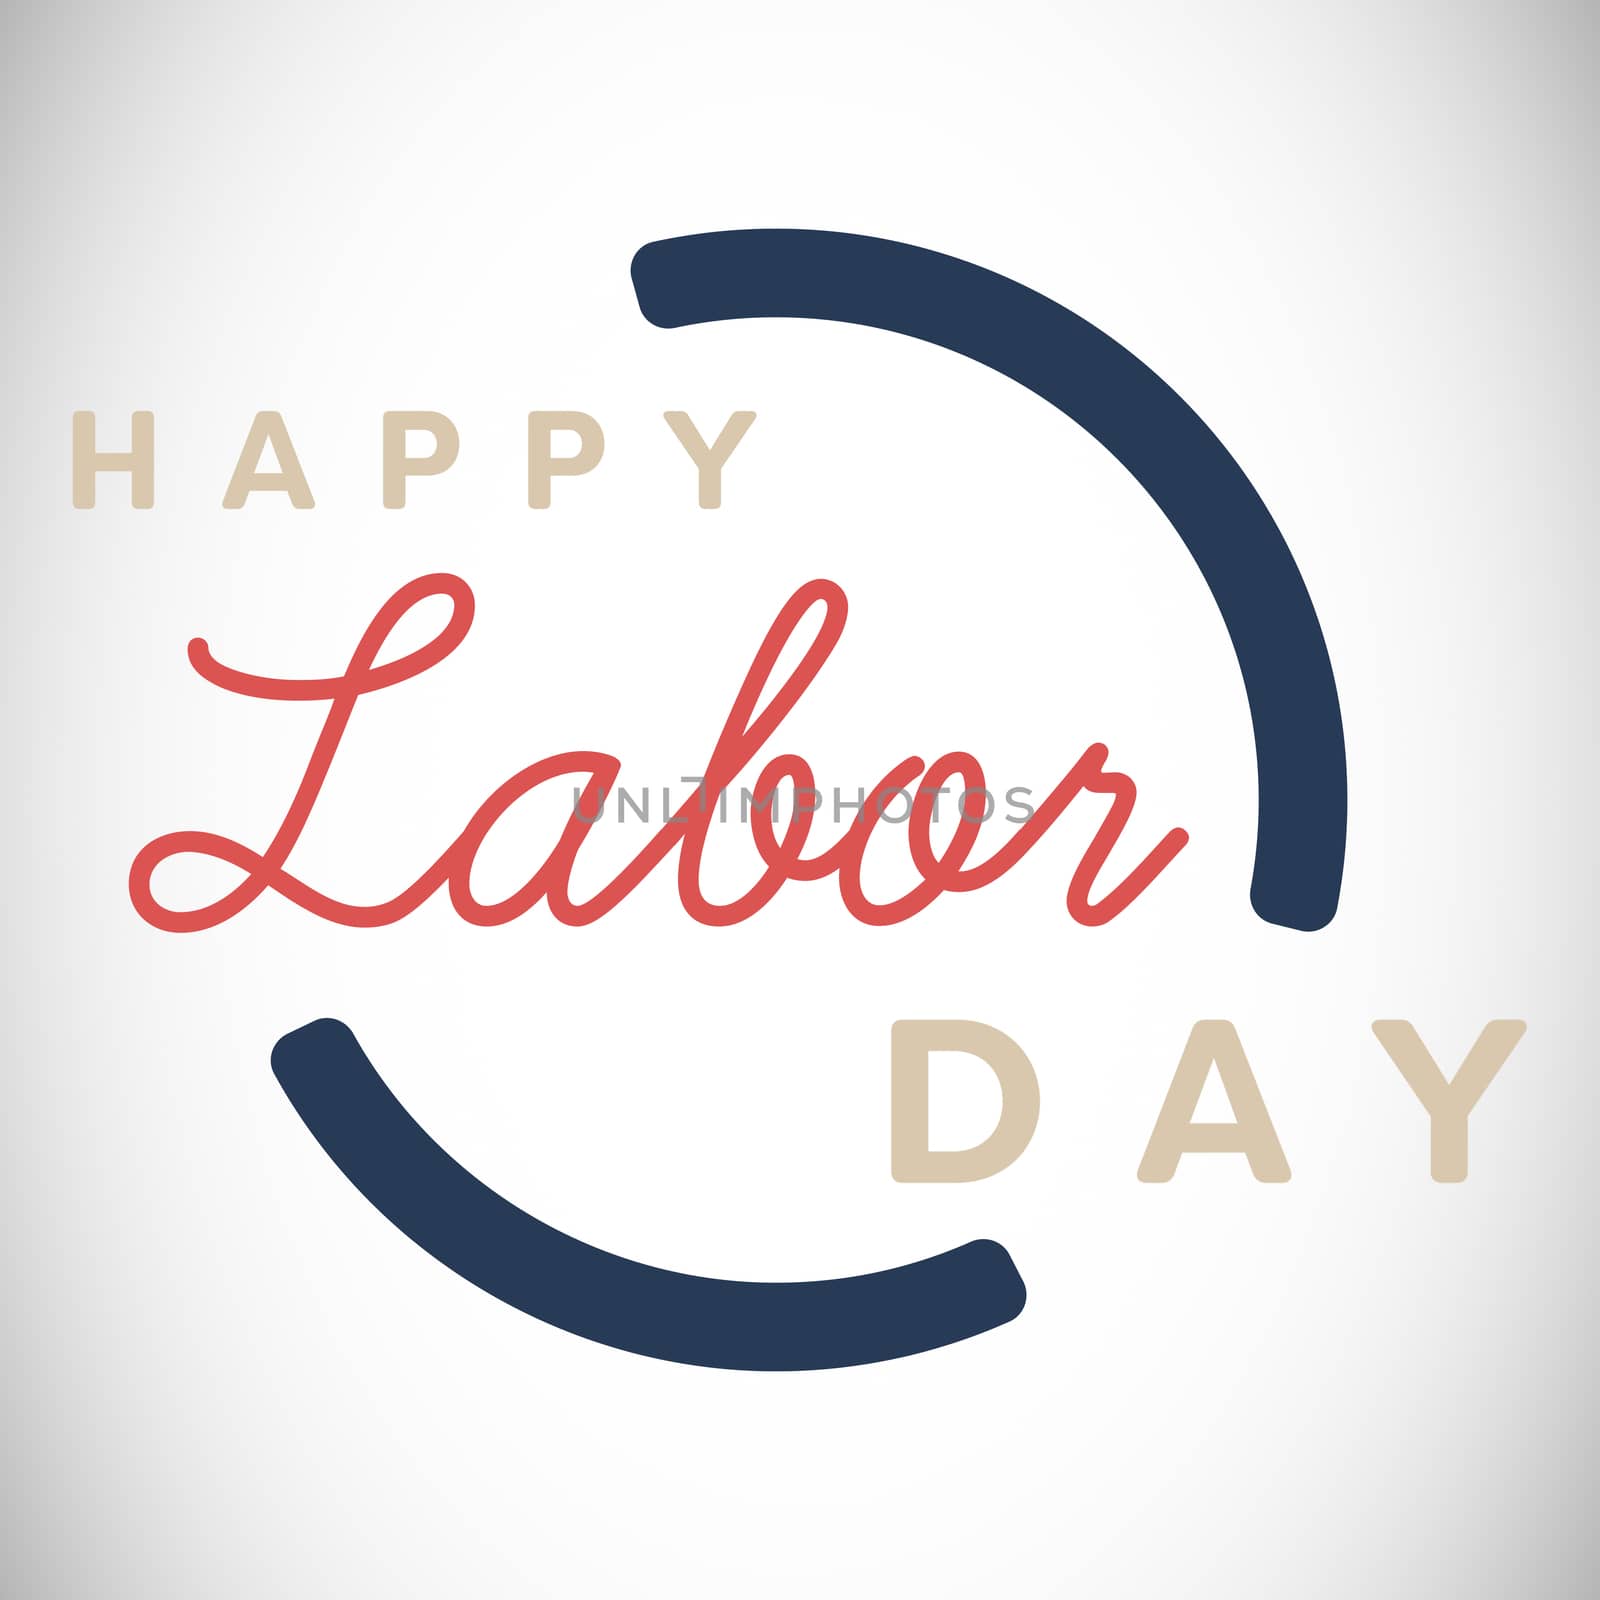 Digital composite image of happy labor day text with blue outline against white background